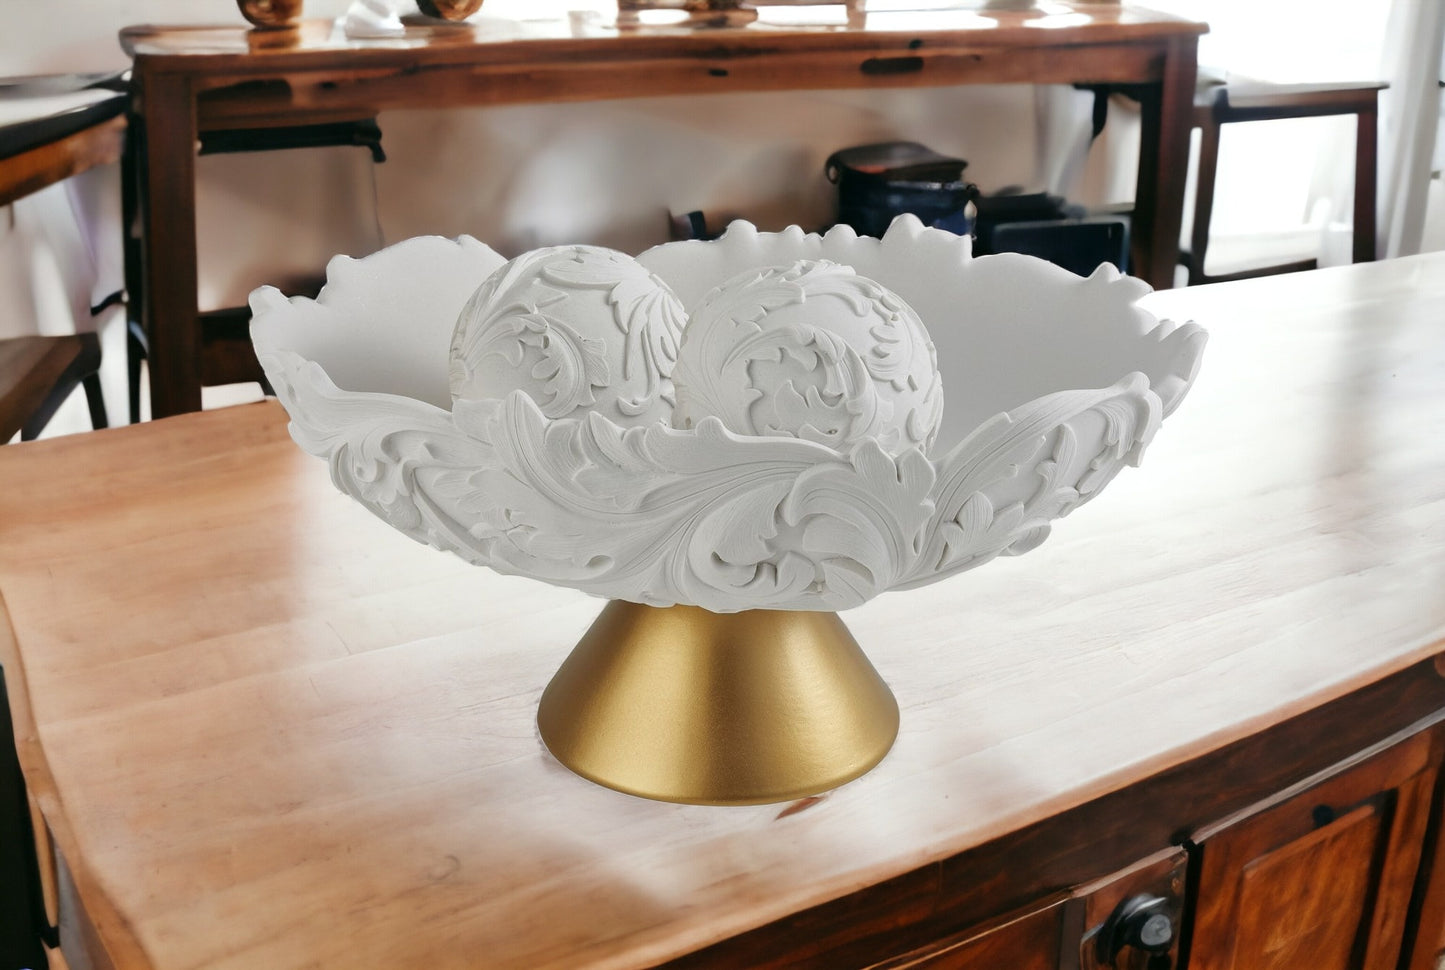 9" Matte Gold And White Polyresin Decorative Bowl With Orbs